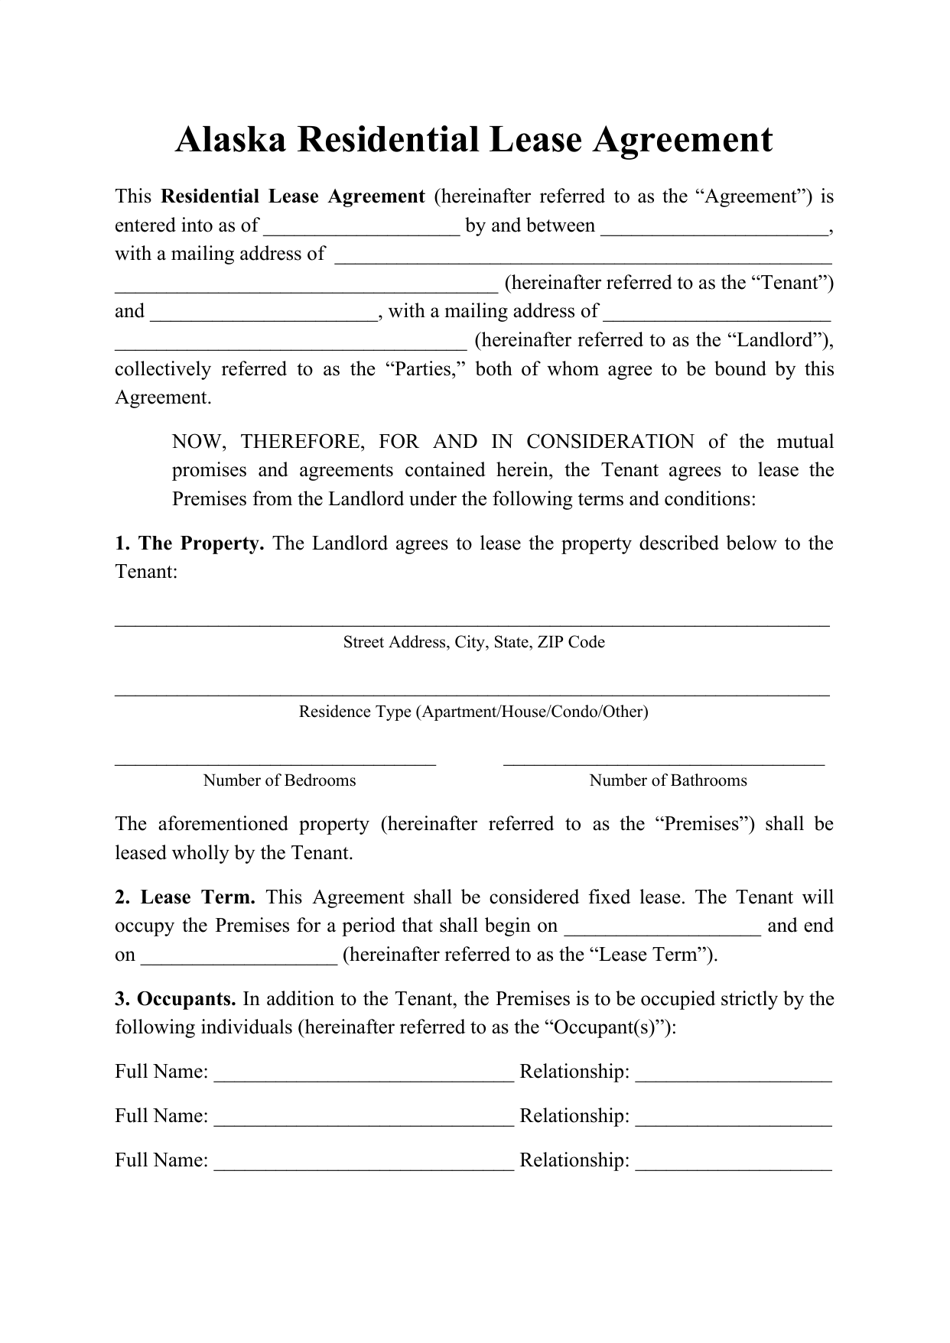 Residential Lease Agreement Template - Alaska, Page 1